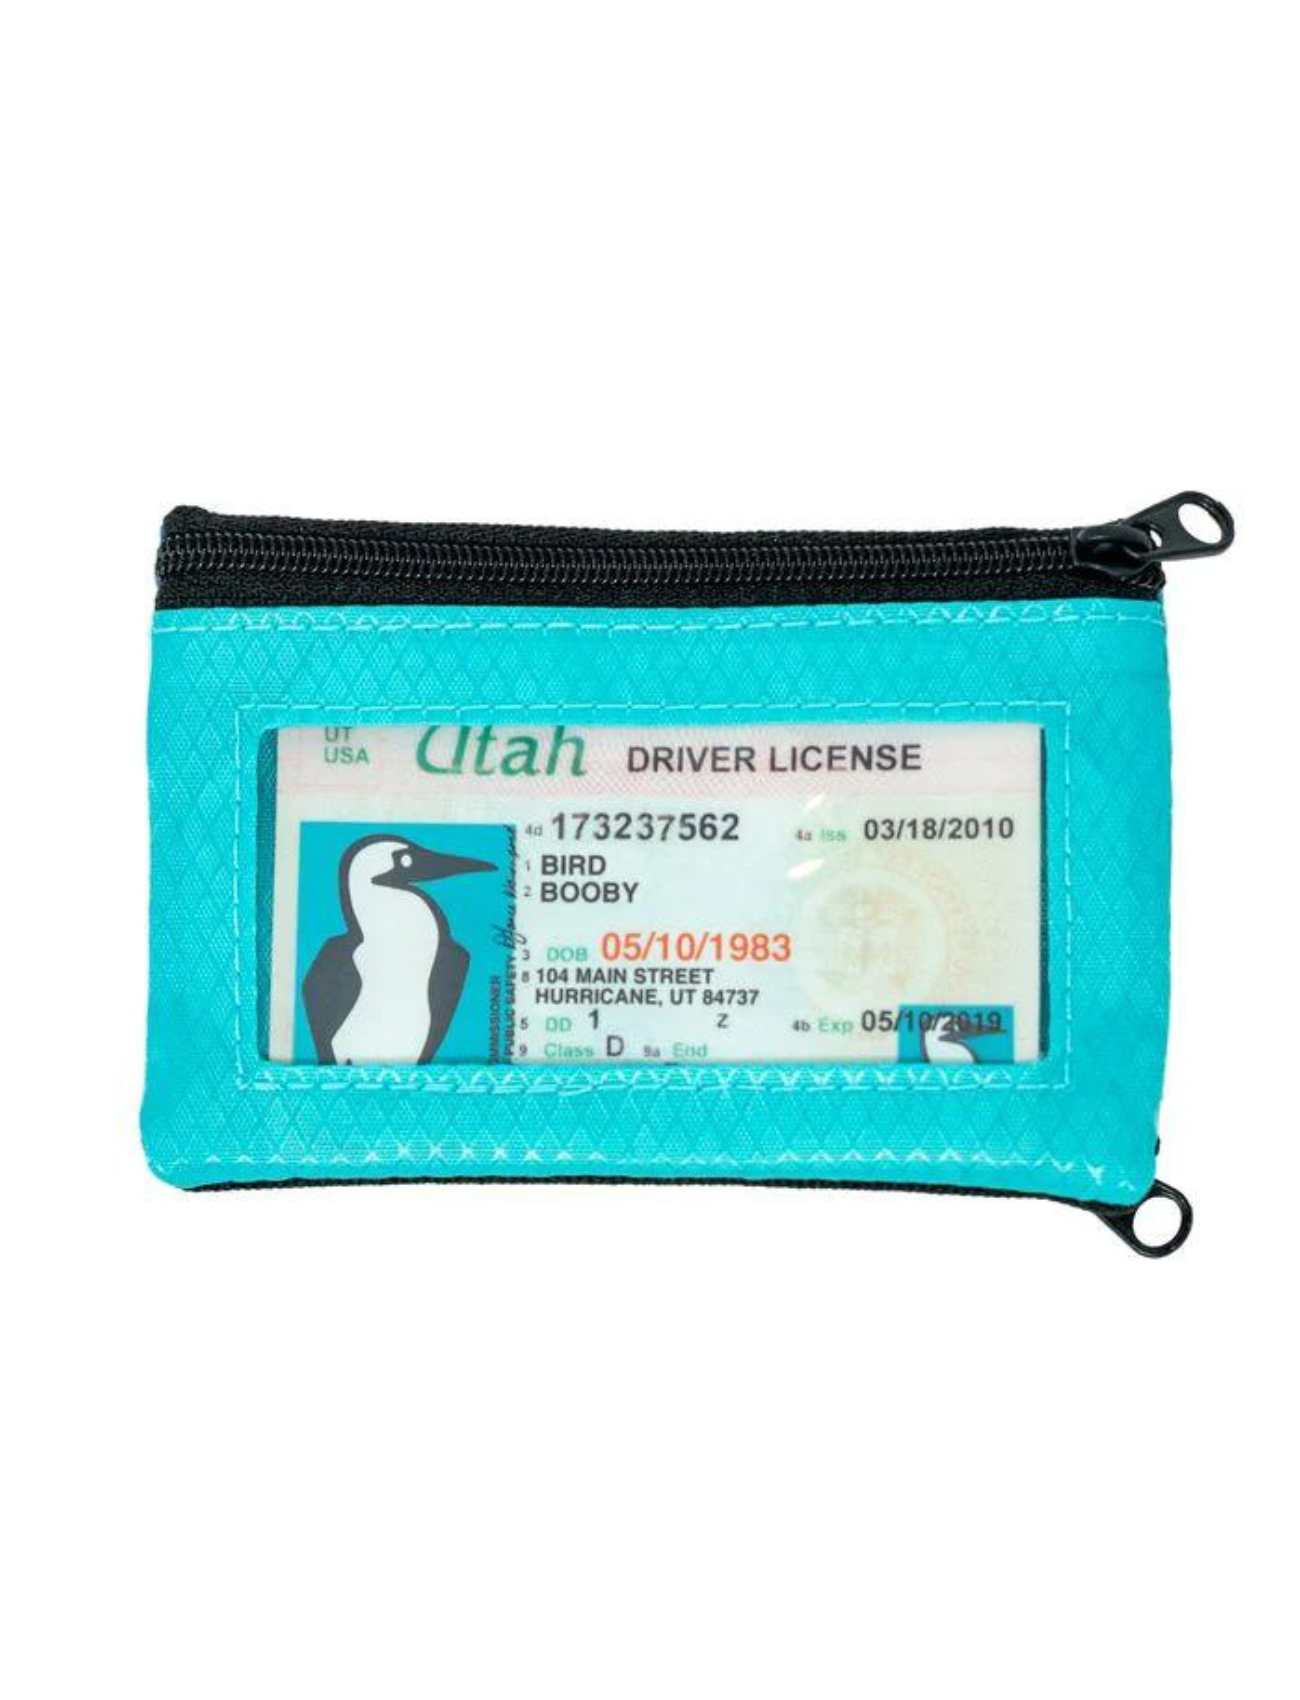 Chums - Surfshorts Wallet USA